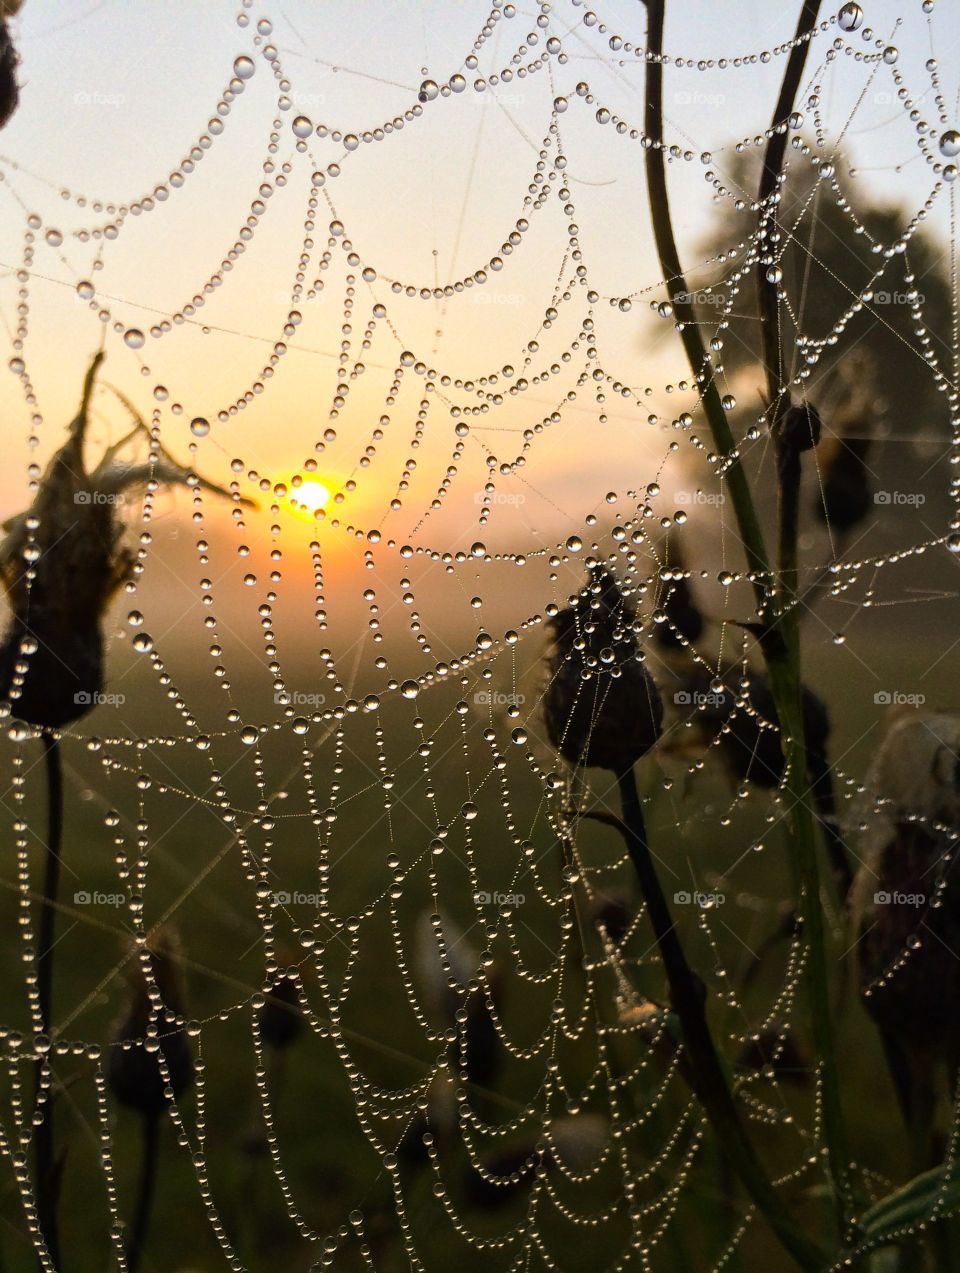 Close up of a spider web at dusk